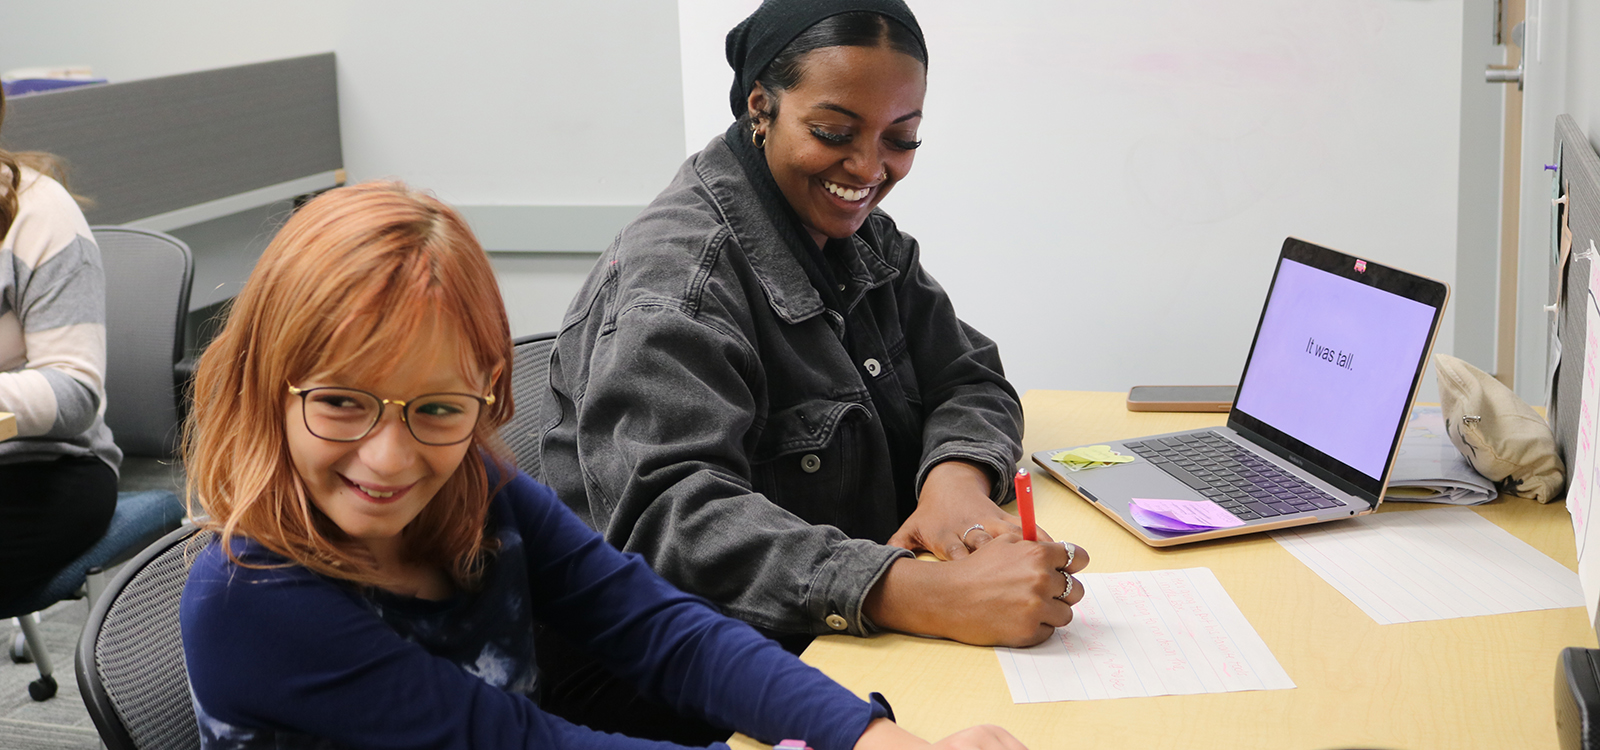 A Husker student and a young girl laugh during a tutoring session at the Schmoker Reading Center.